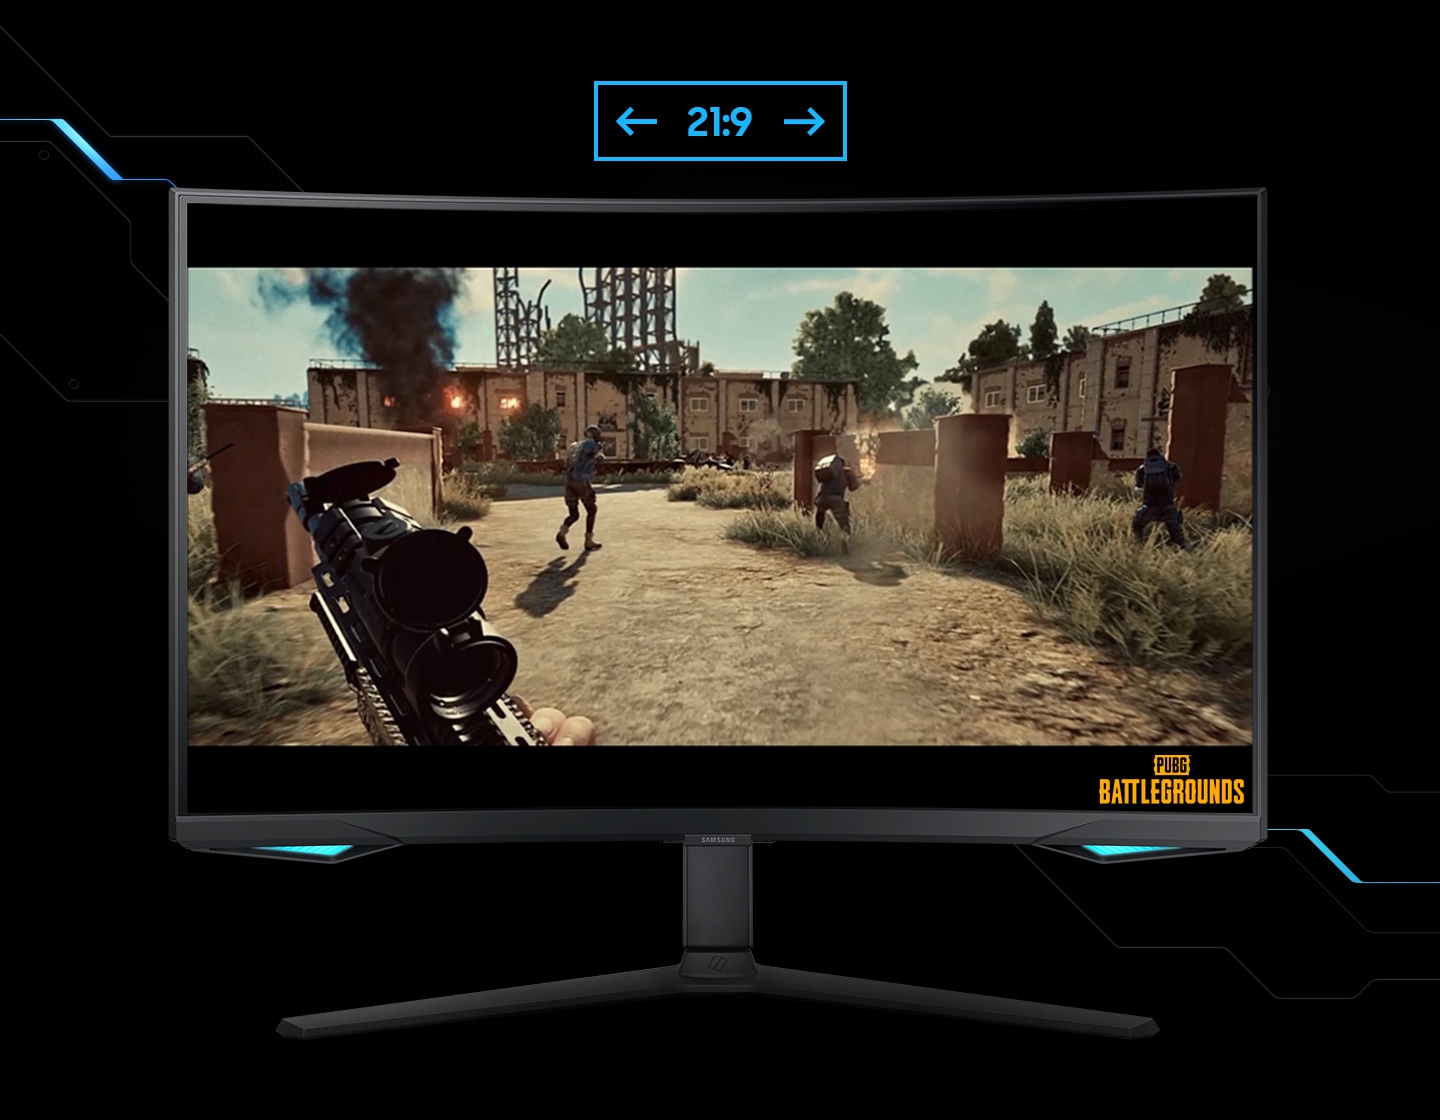 A monitor shows the viewpoint of a player within a shooting game. The player is running around a battle zone, with a machine gun. As the screen is extended from 16:9 to 21:9 proportion, an unseen enemy reveals in the left corner. ""Battleground"" logo is shown on the right lower corner of the screen.